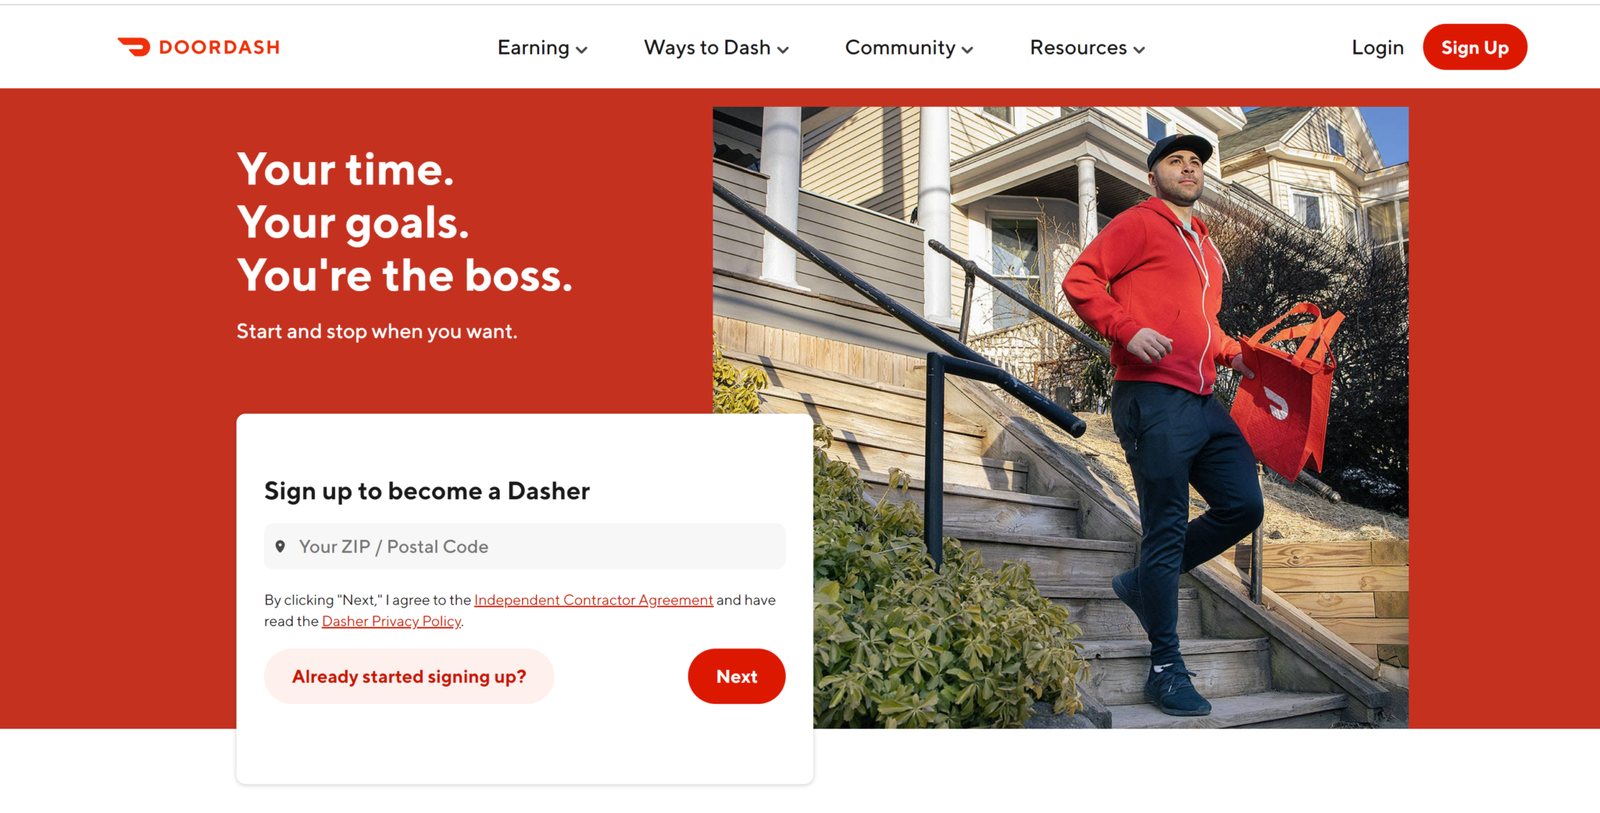 Is DoorDash Worth it After Taxes? Imautomator